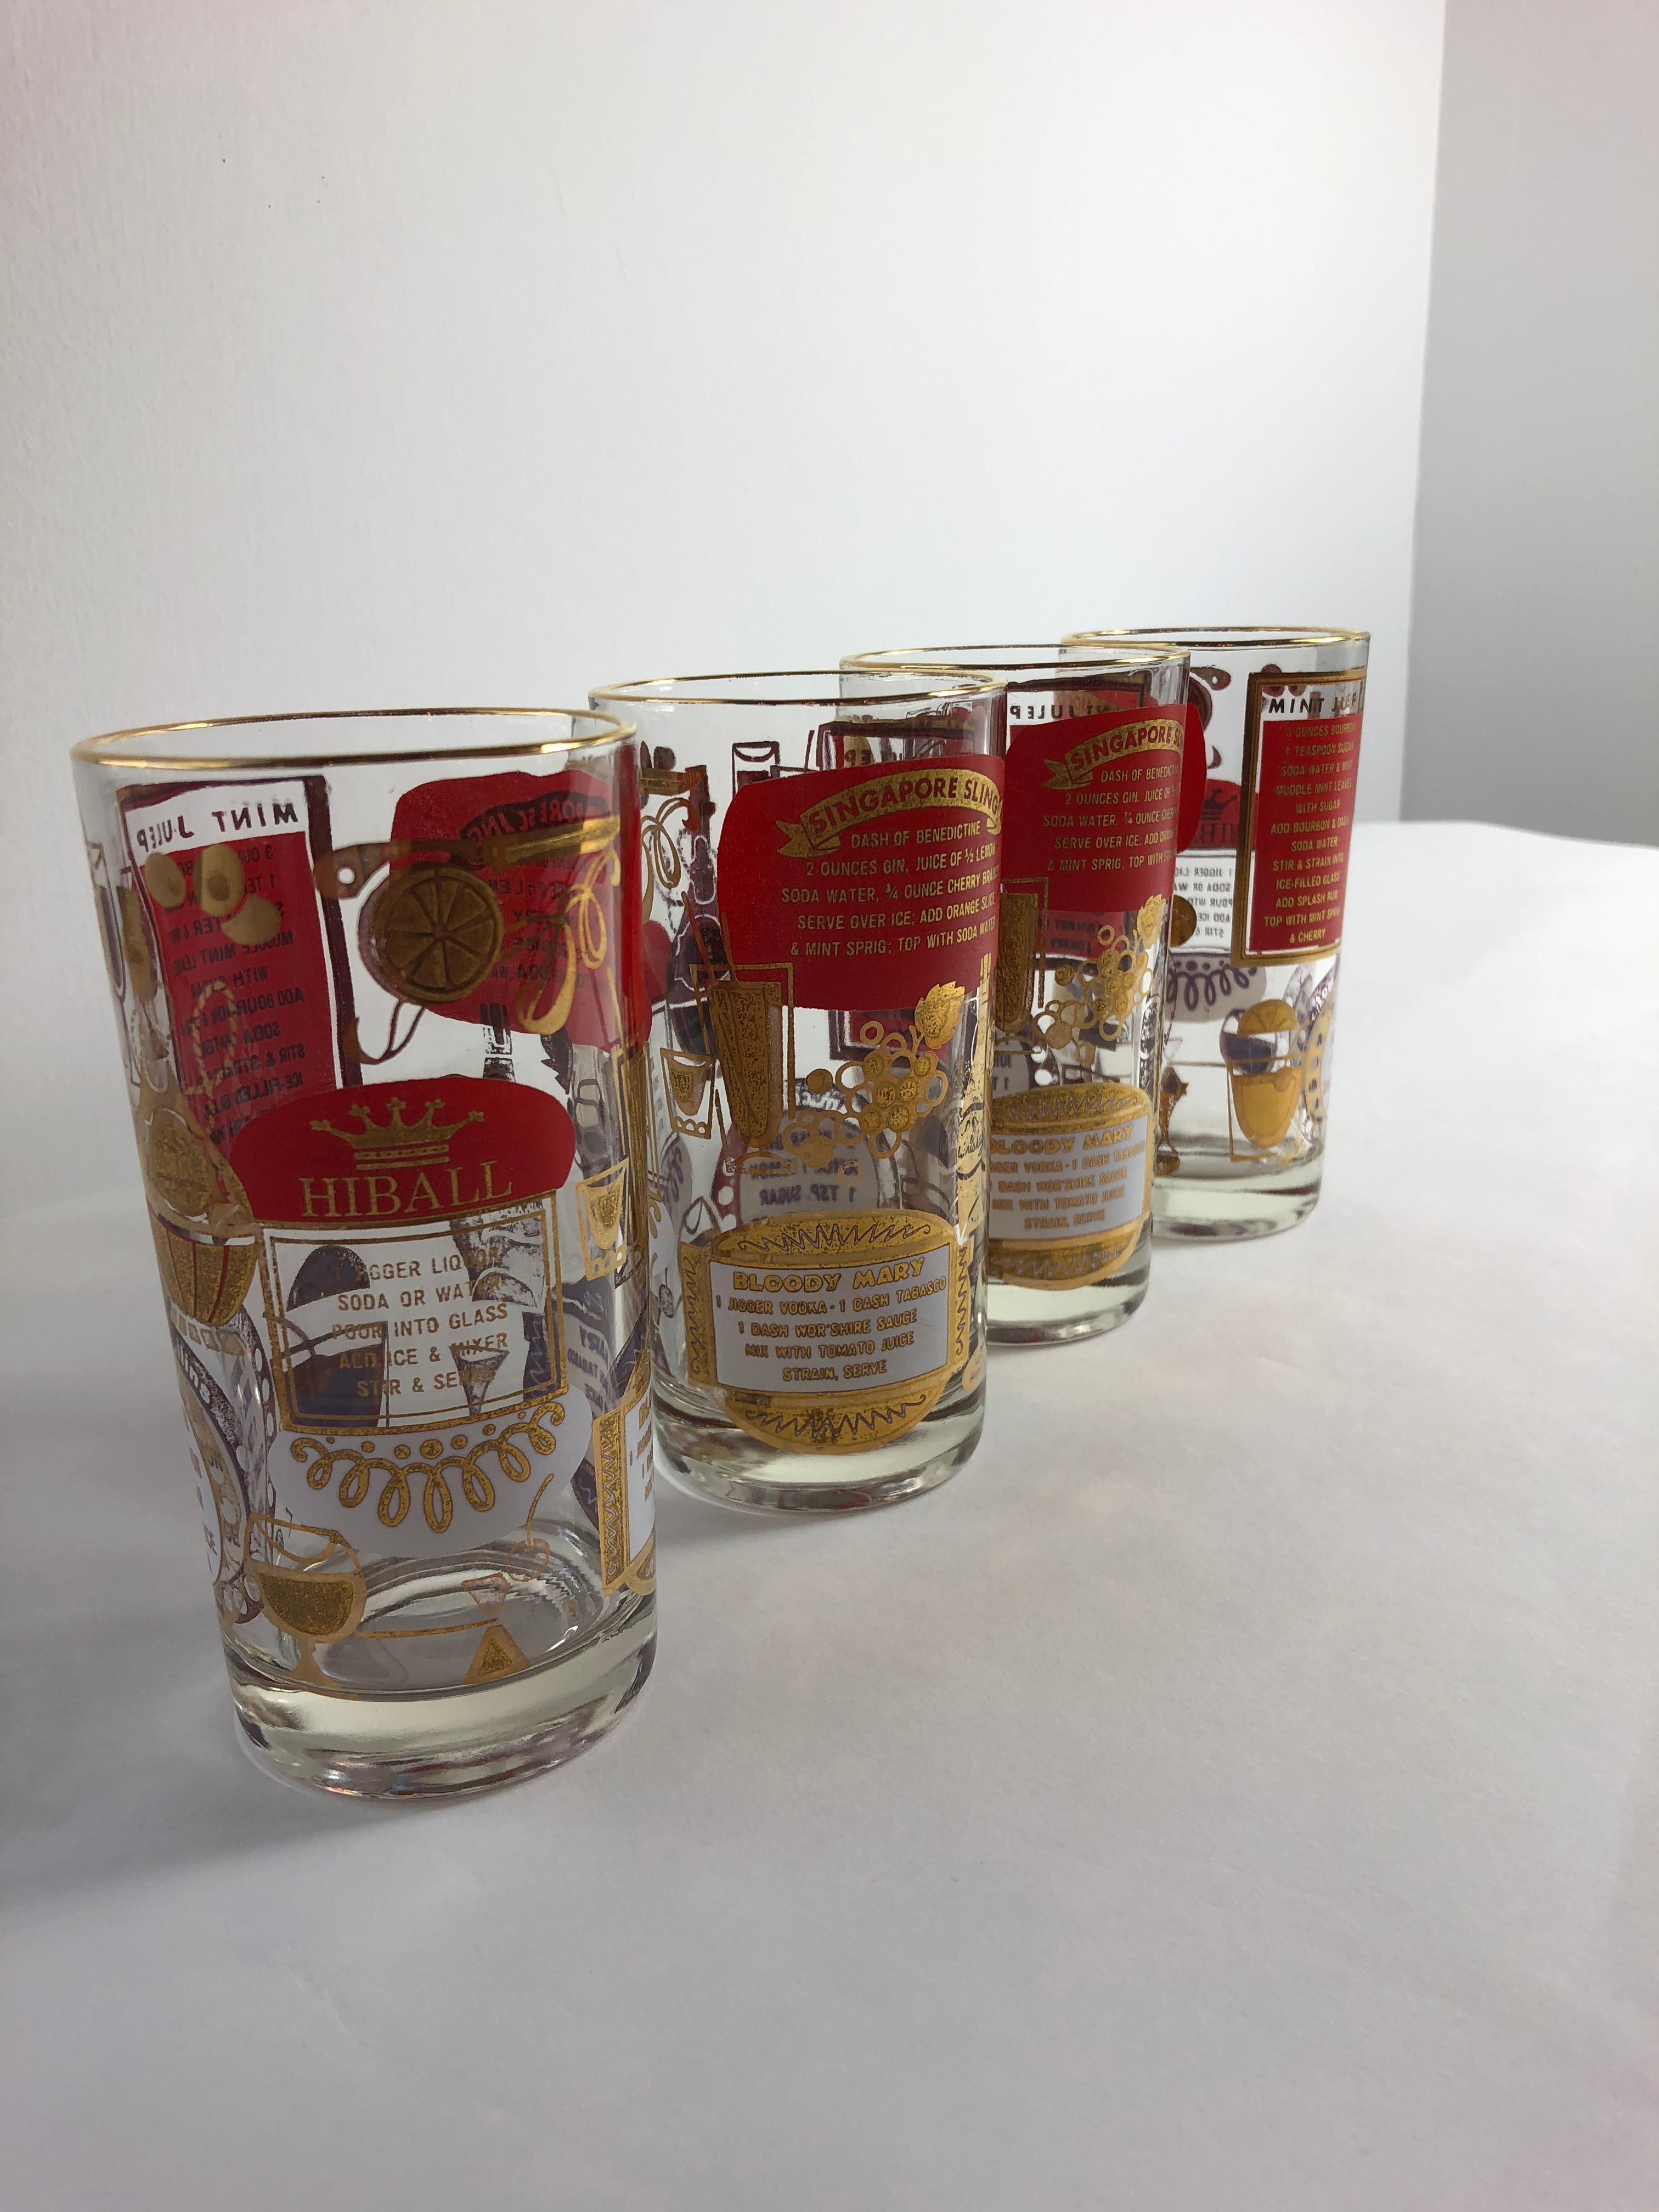 Offered is a set of four Mid-Century Modern red and gold gilt with cocktail recipes motif cocktail glasses. Not sure of the make. Could be Georges Briard. The set is so very midcentury with recipes for a Singapore Sling, Bloody Mary, Mint Julep and